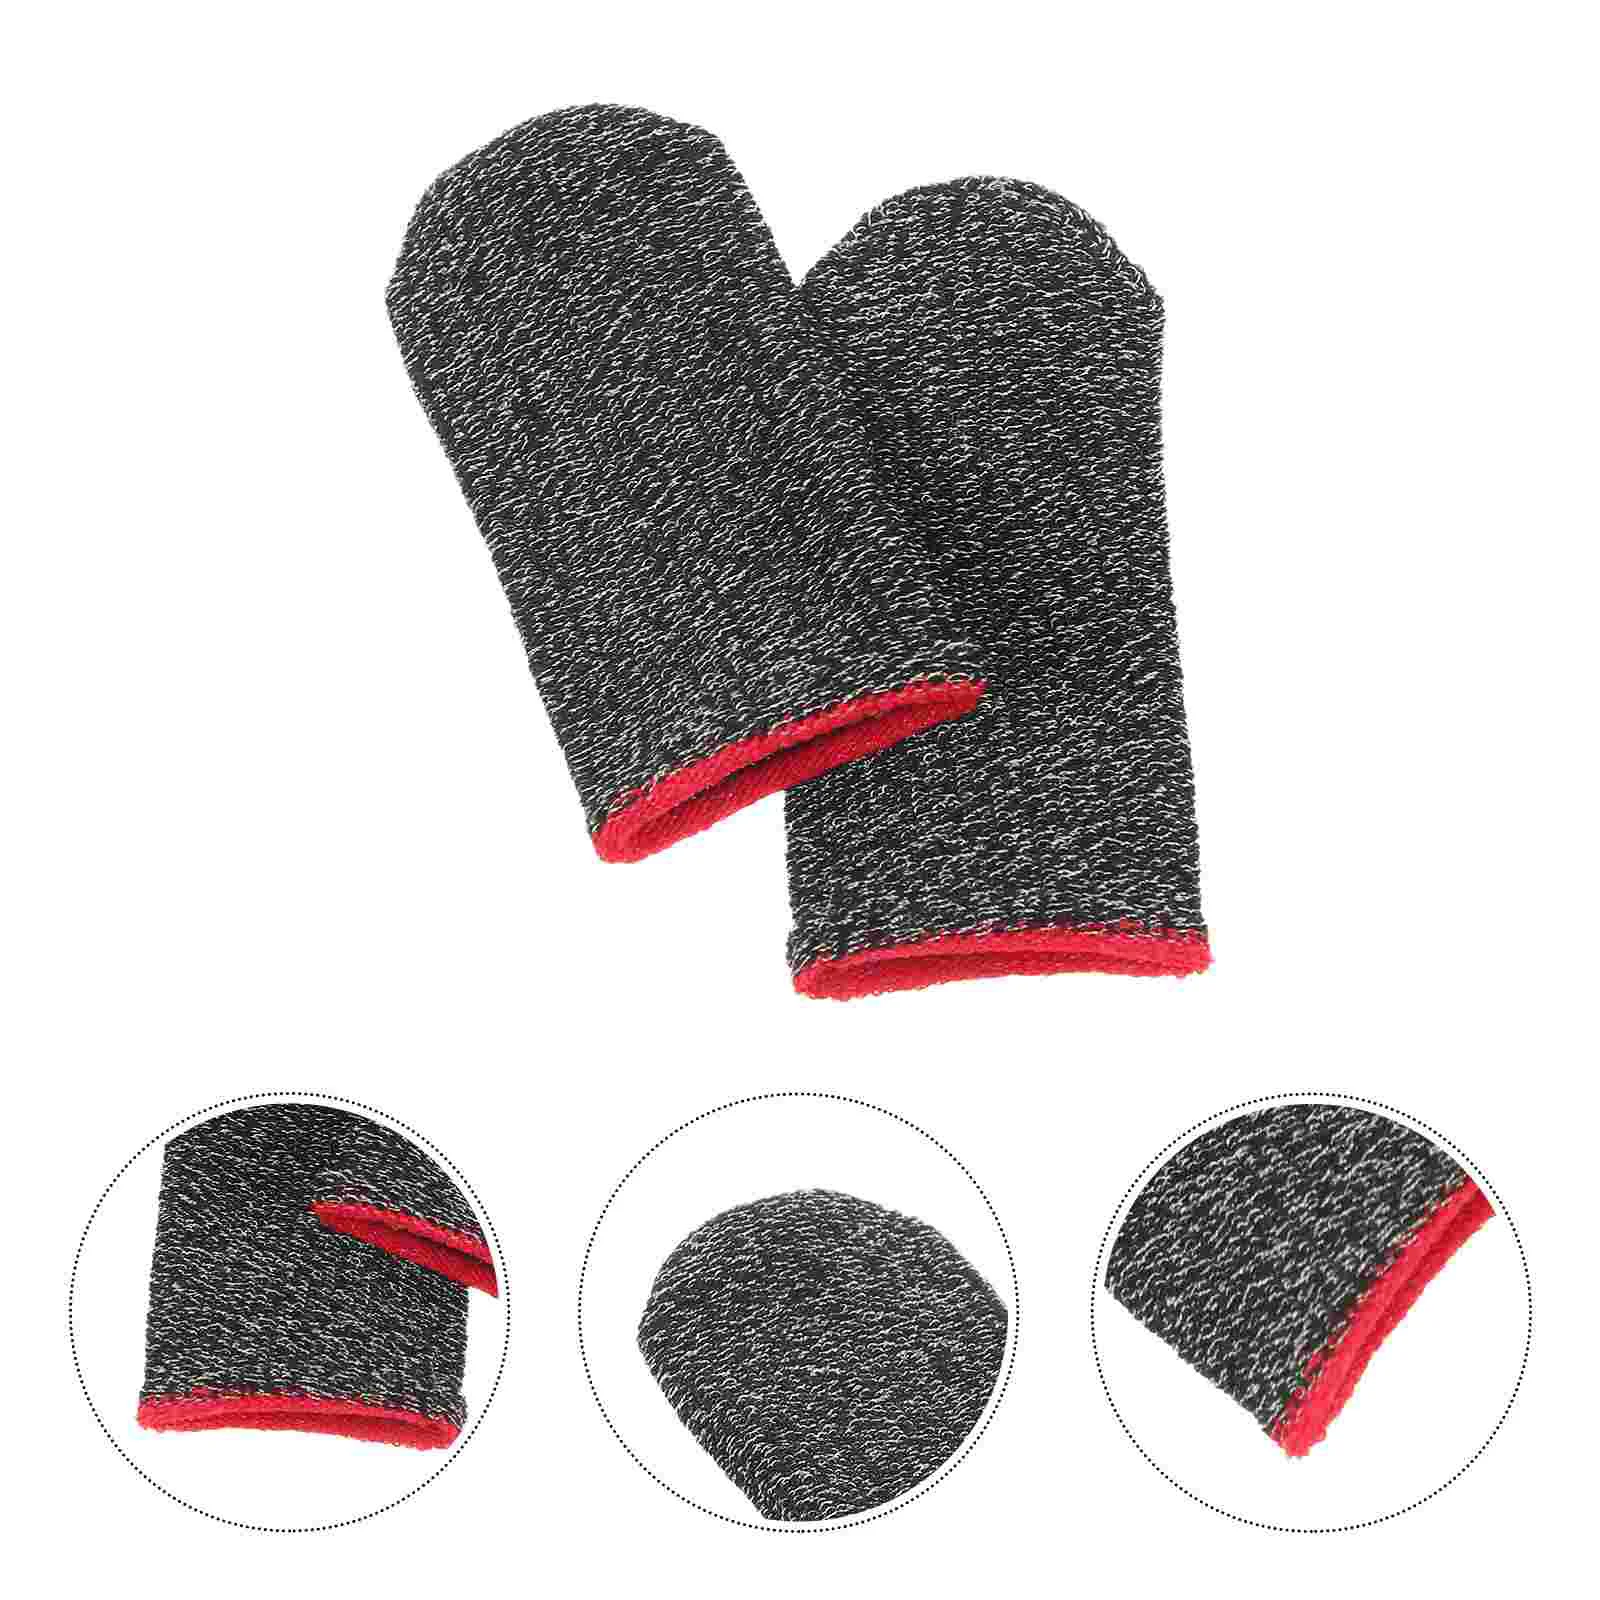 

10 Pcs Mobile Game Finger Cot Gloves Cover Sleeve Thumb Covers Protection for Tips Gaming Silver Fiber Protector